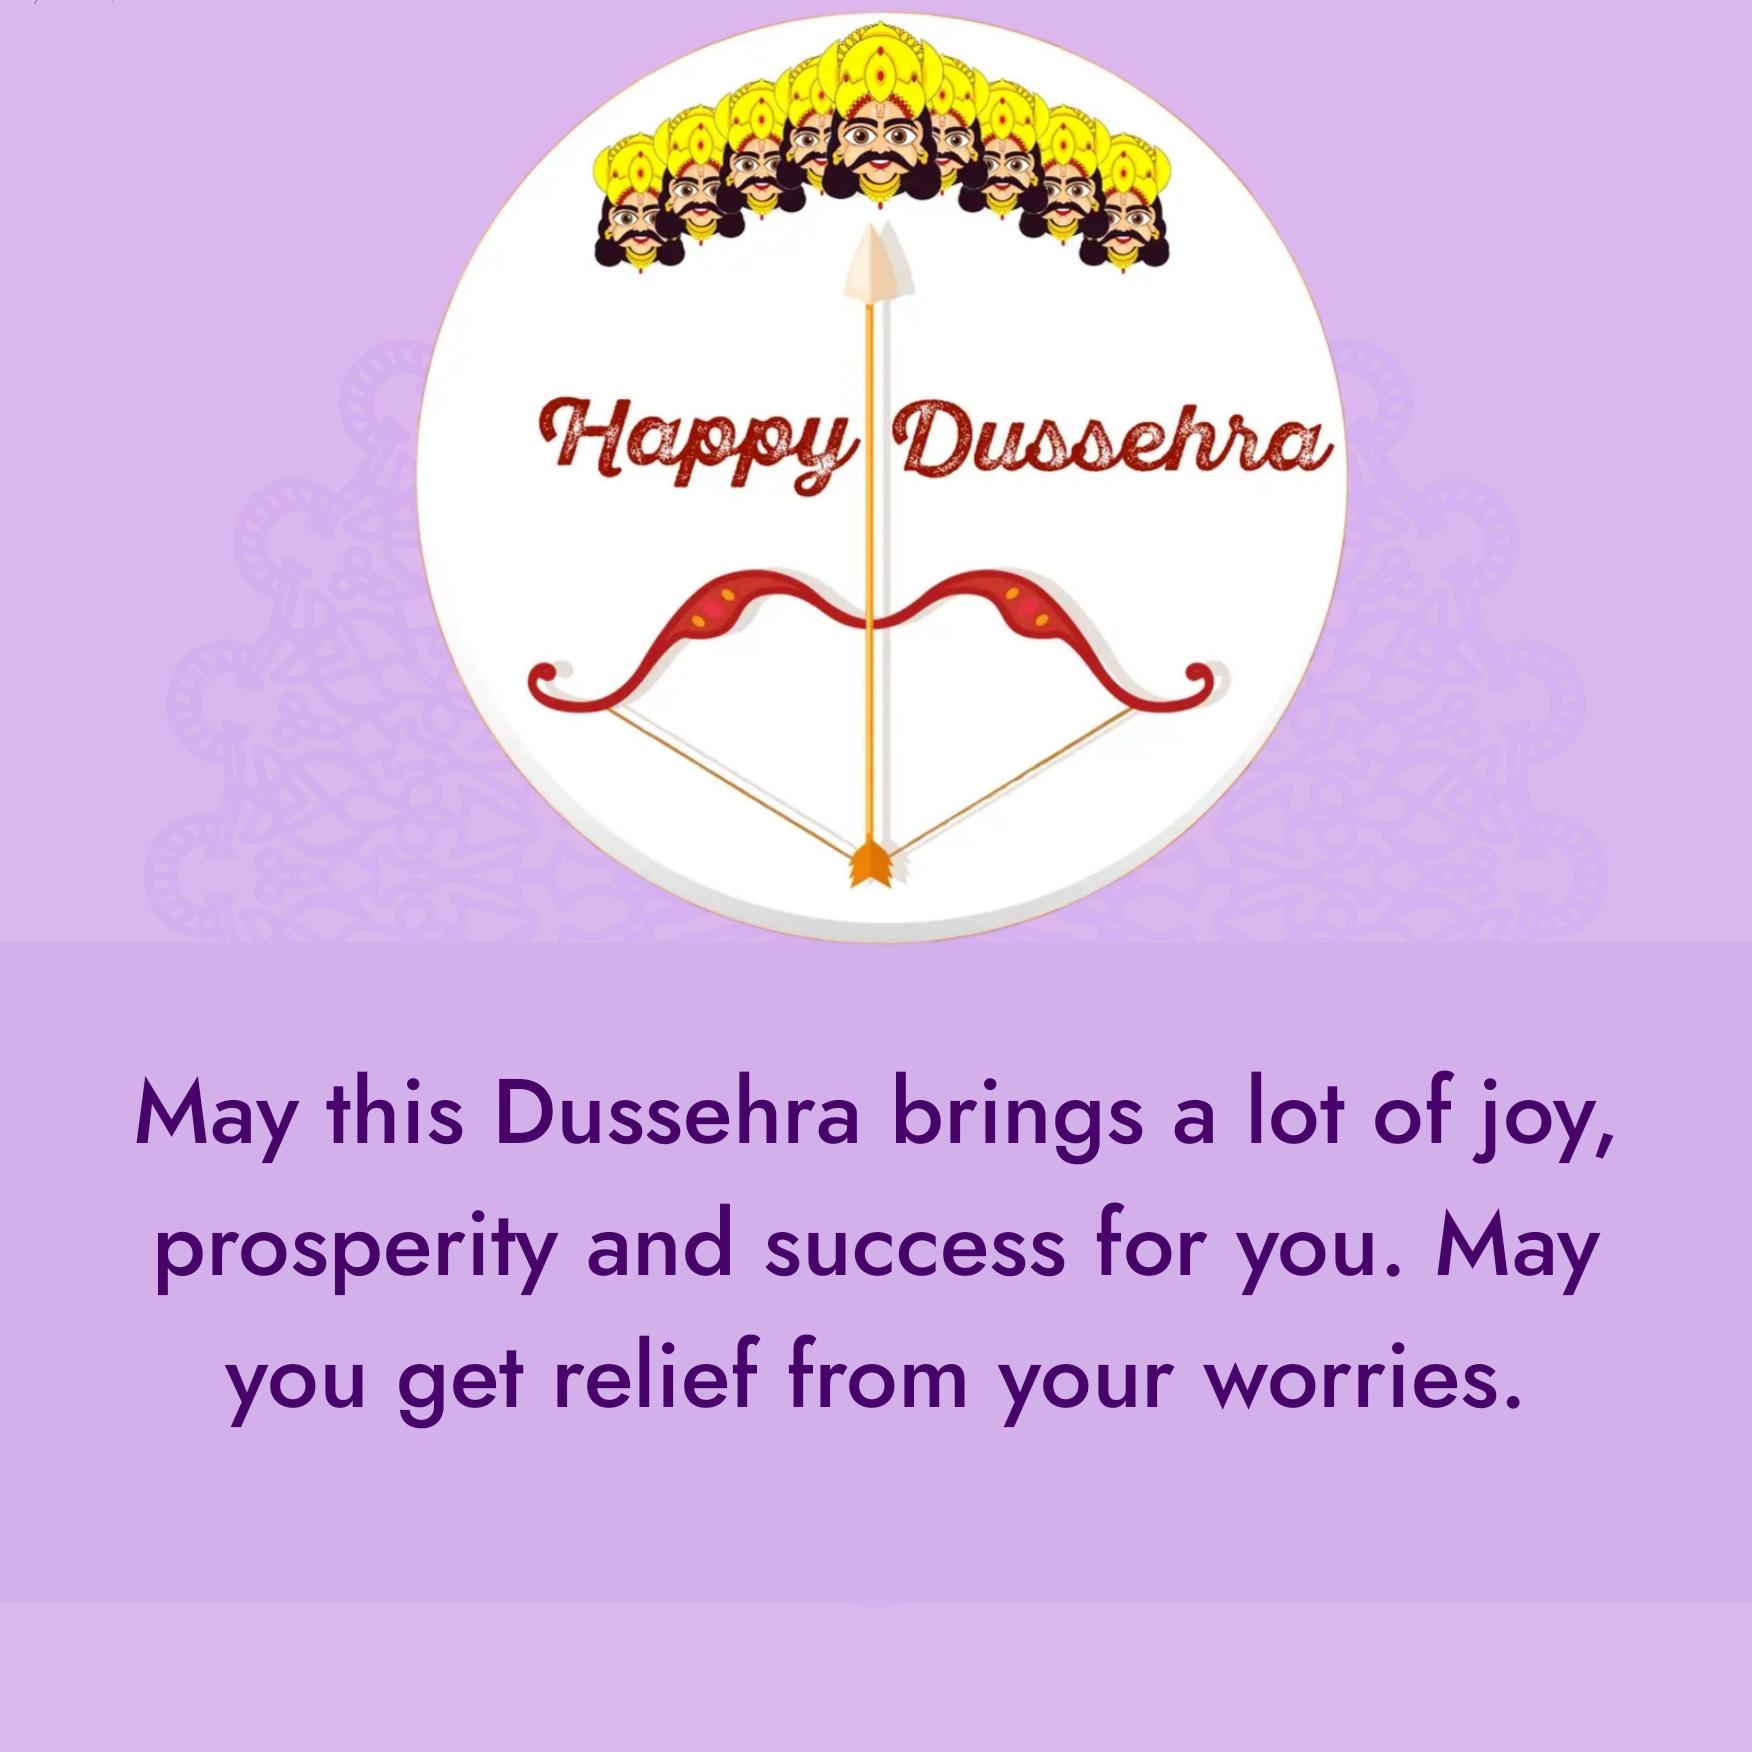 May this Dussehra brings a lot of joy prosperity and success